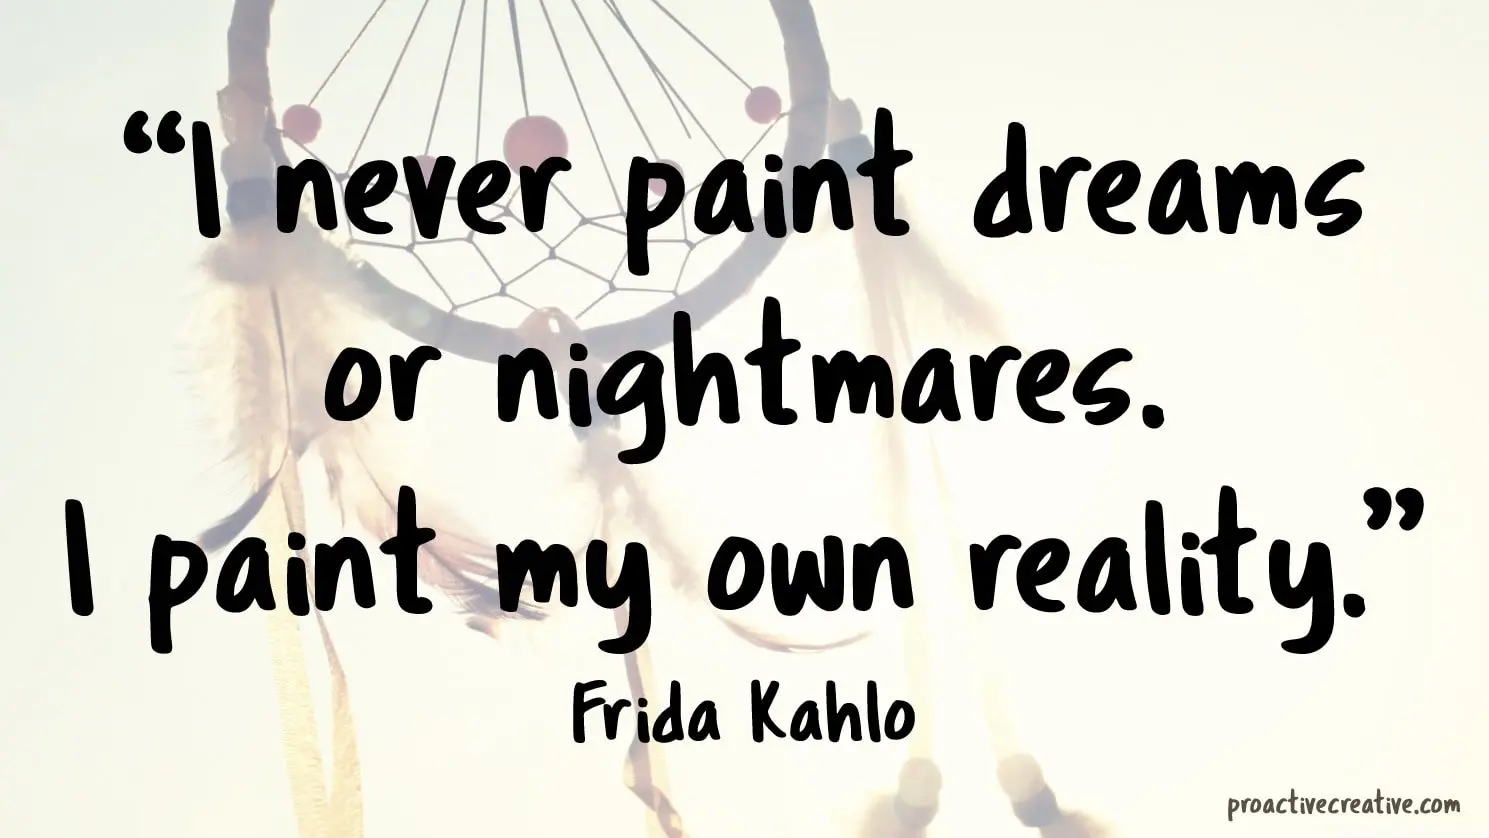 Quotes on art and creativity - Frida Kahlo